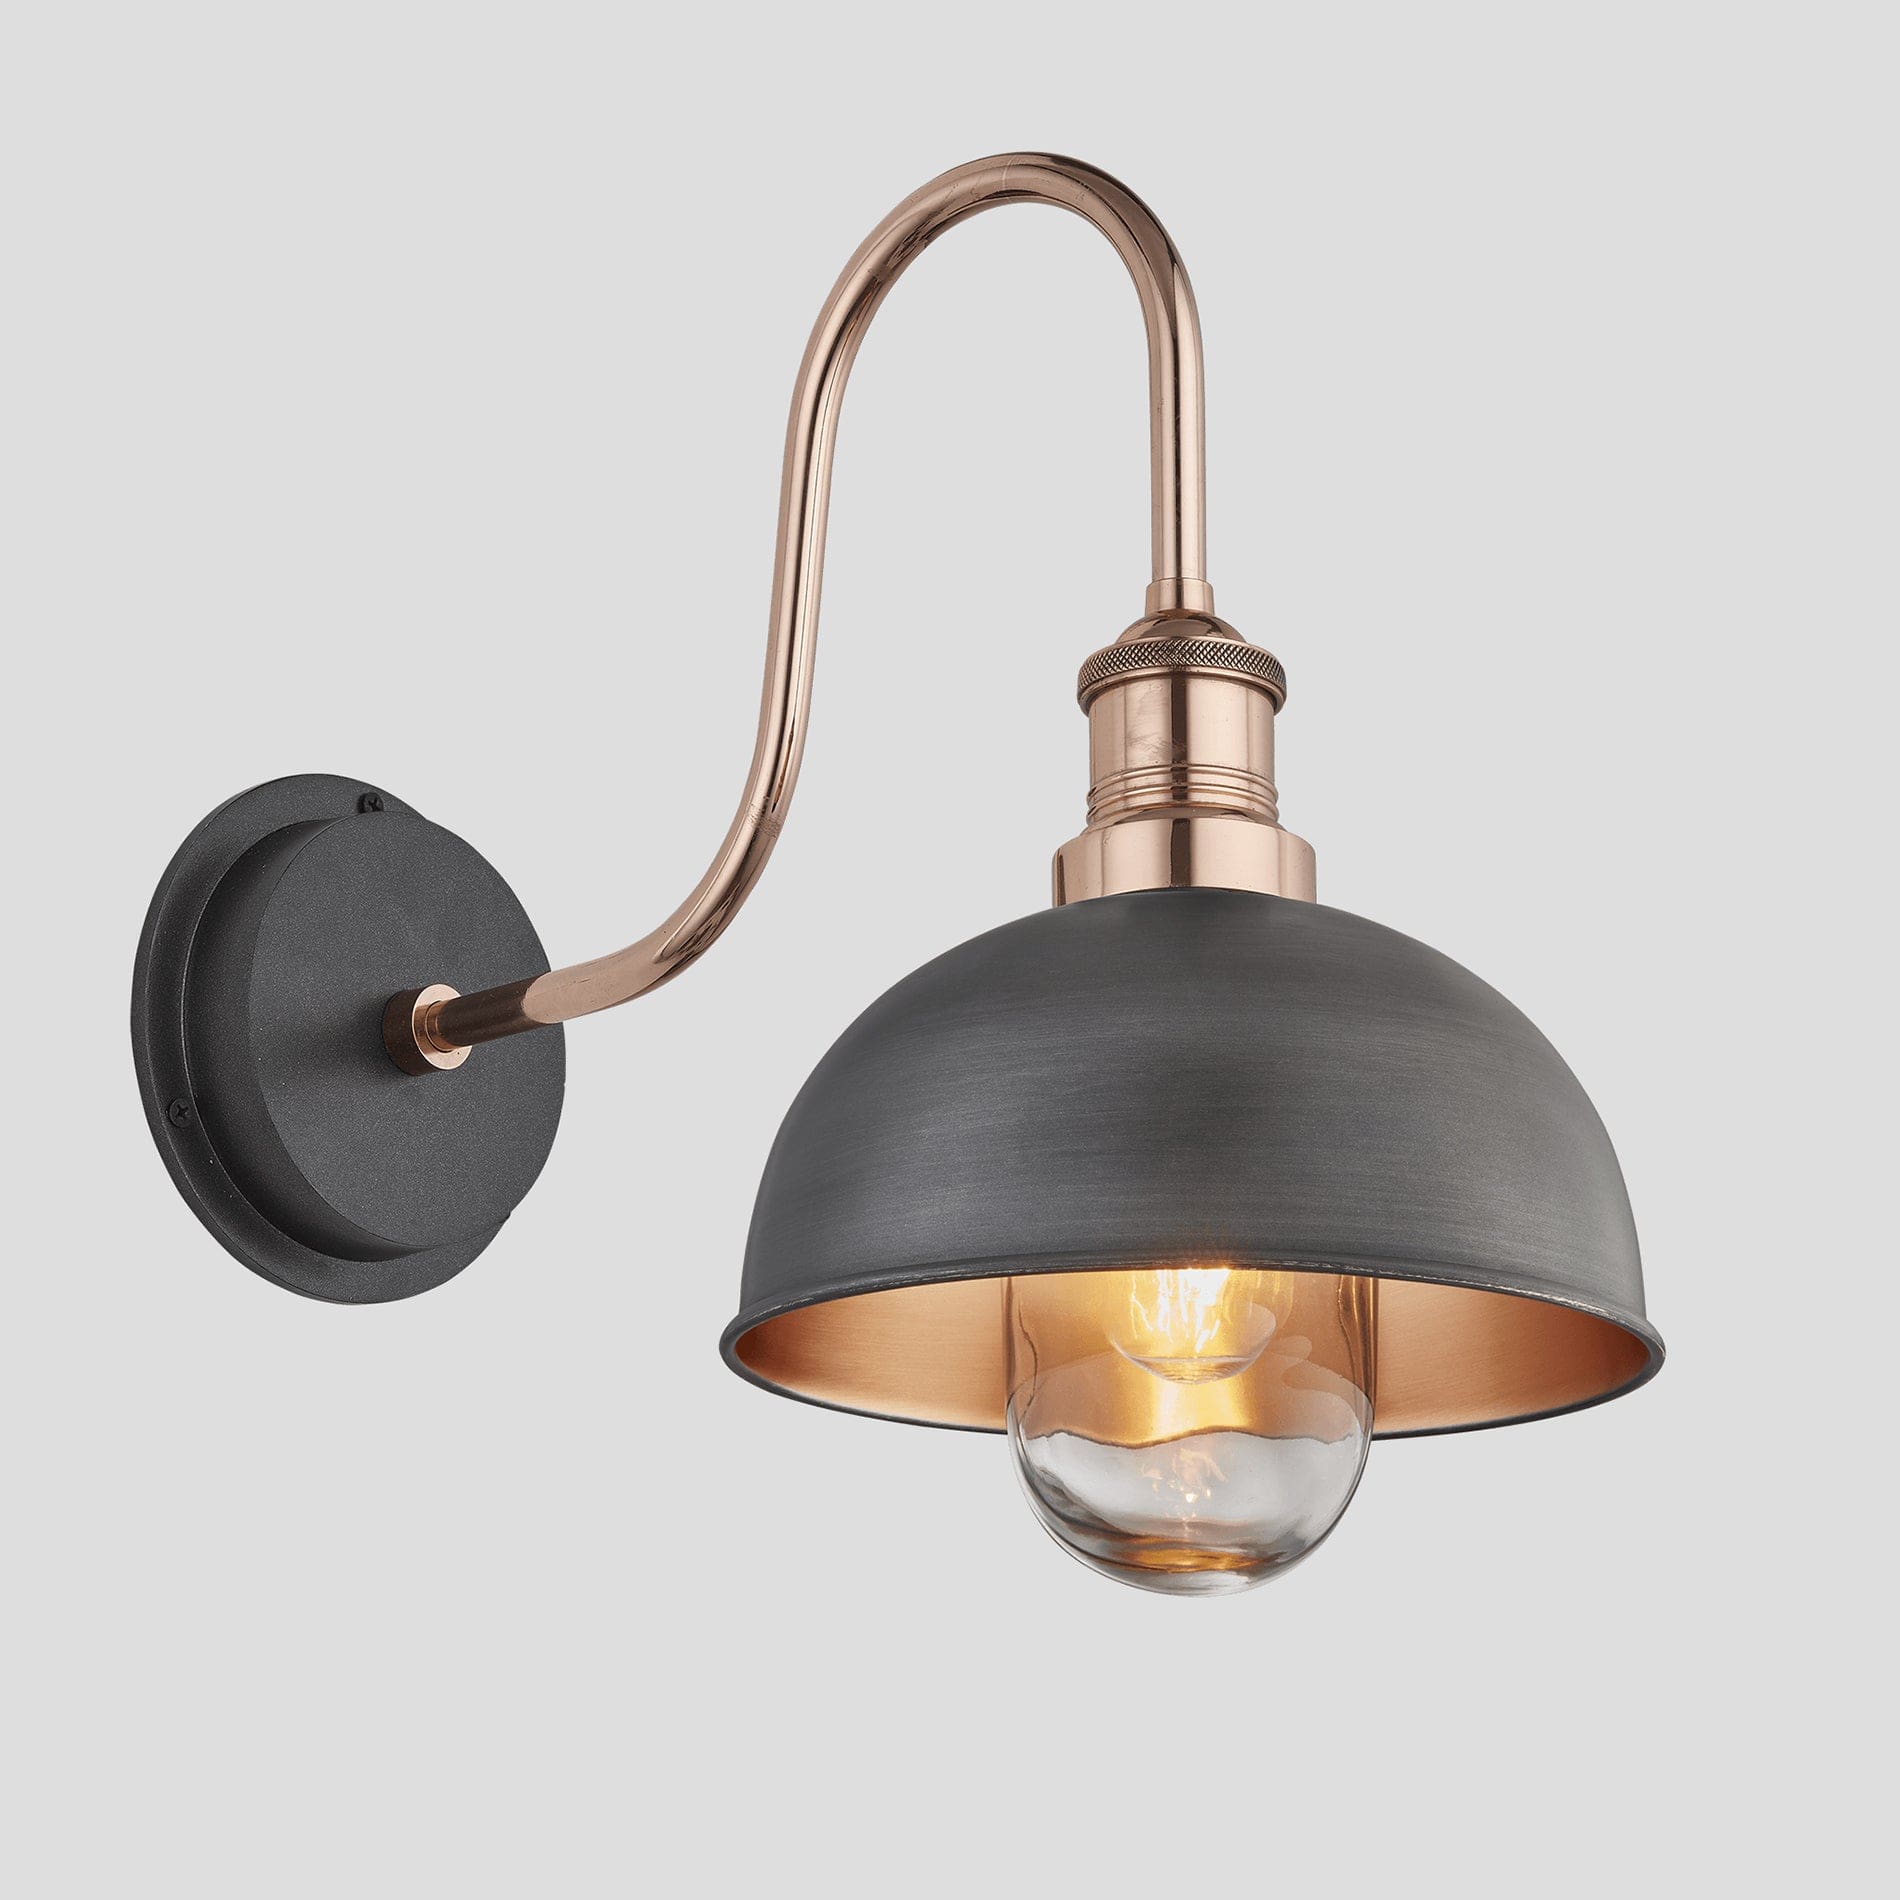 Swan Neck Outdoor & Bathroom Dome Wall Light - 8 Inch - Pewter & Copper Industville SN-IP65-DWL8-CP-CH